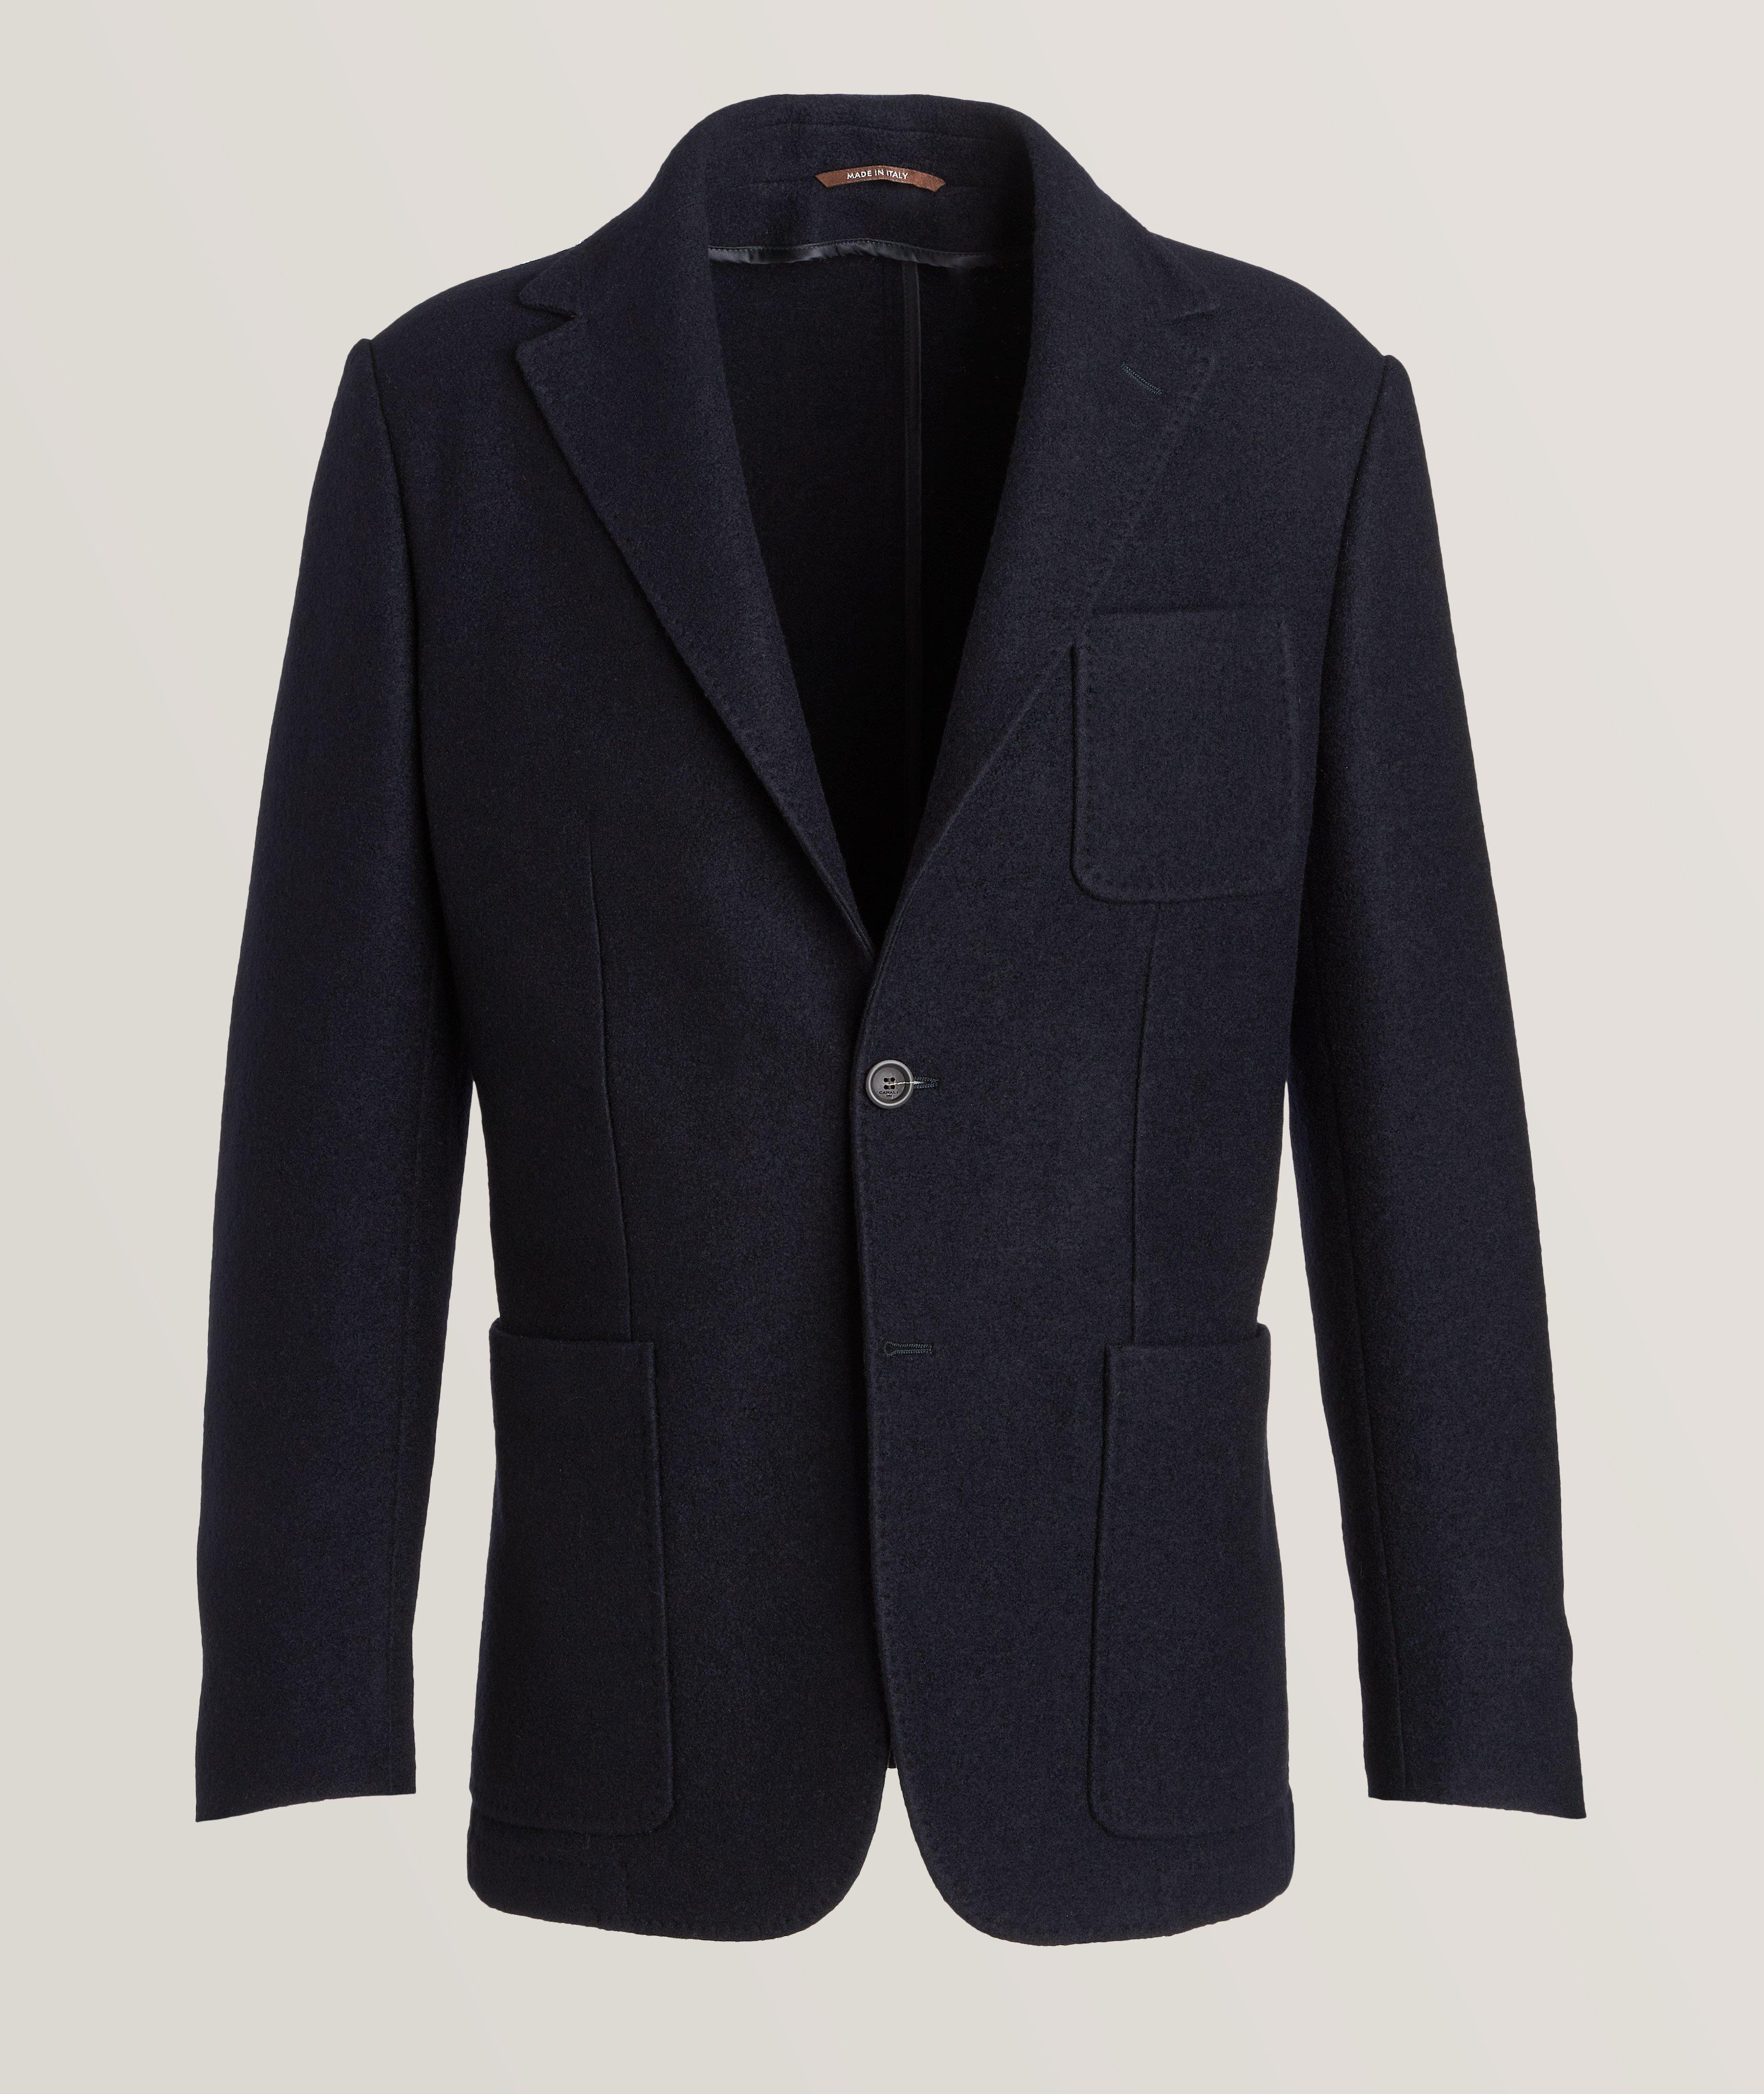 Canali Boiled Wool Blend Unstructured Sport Jacket